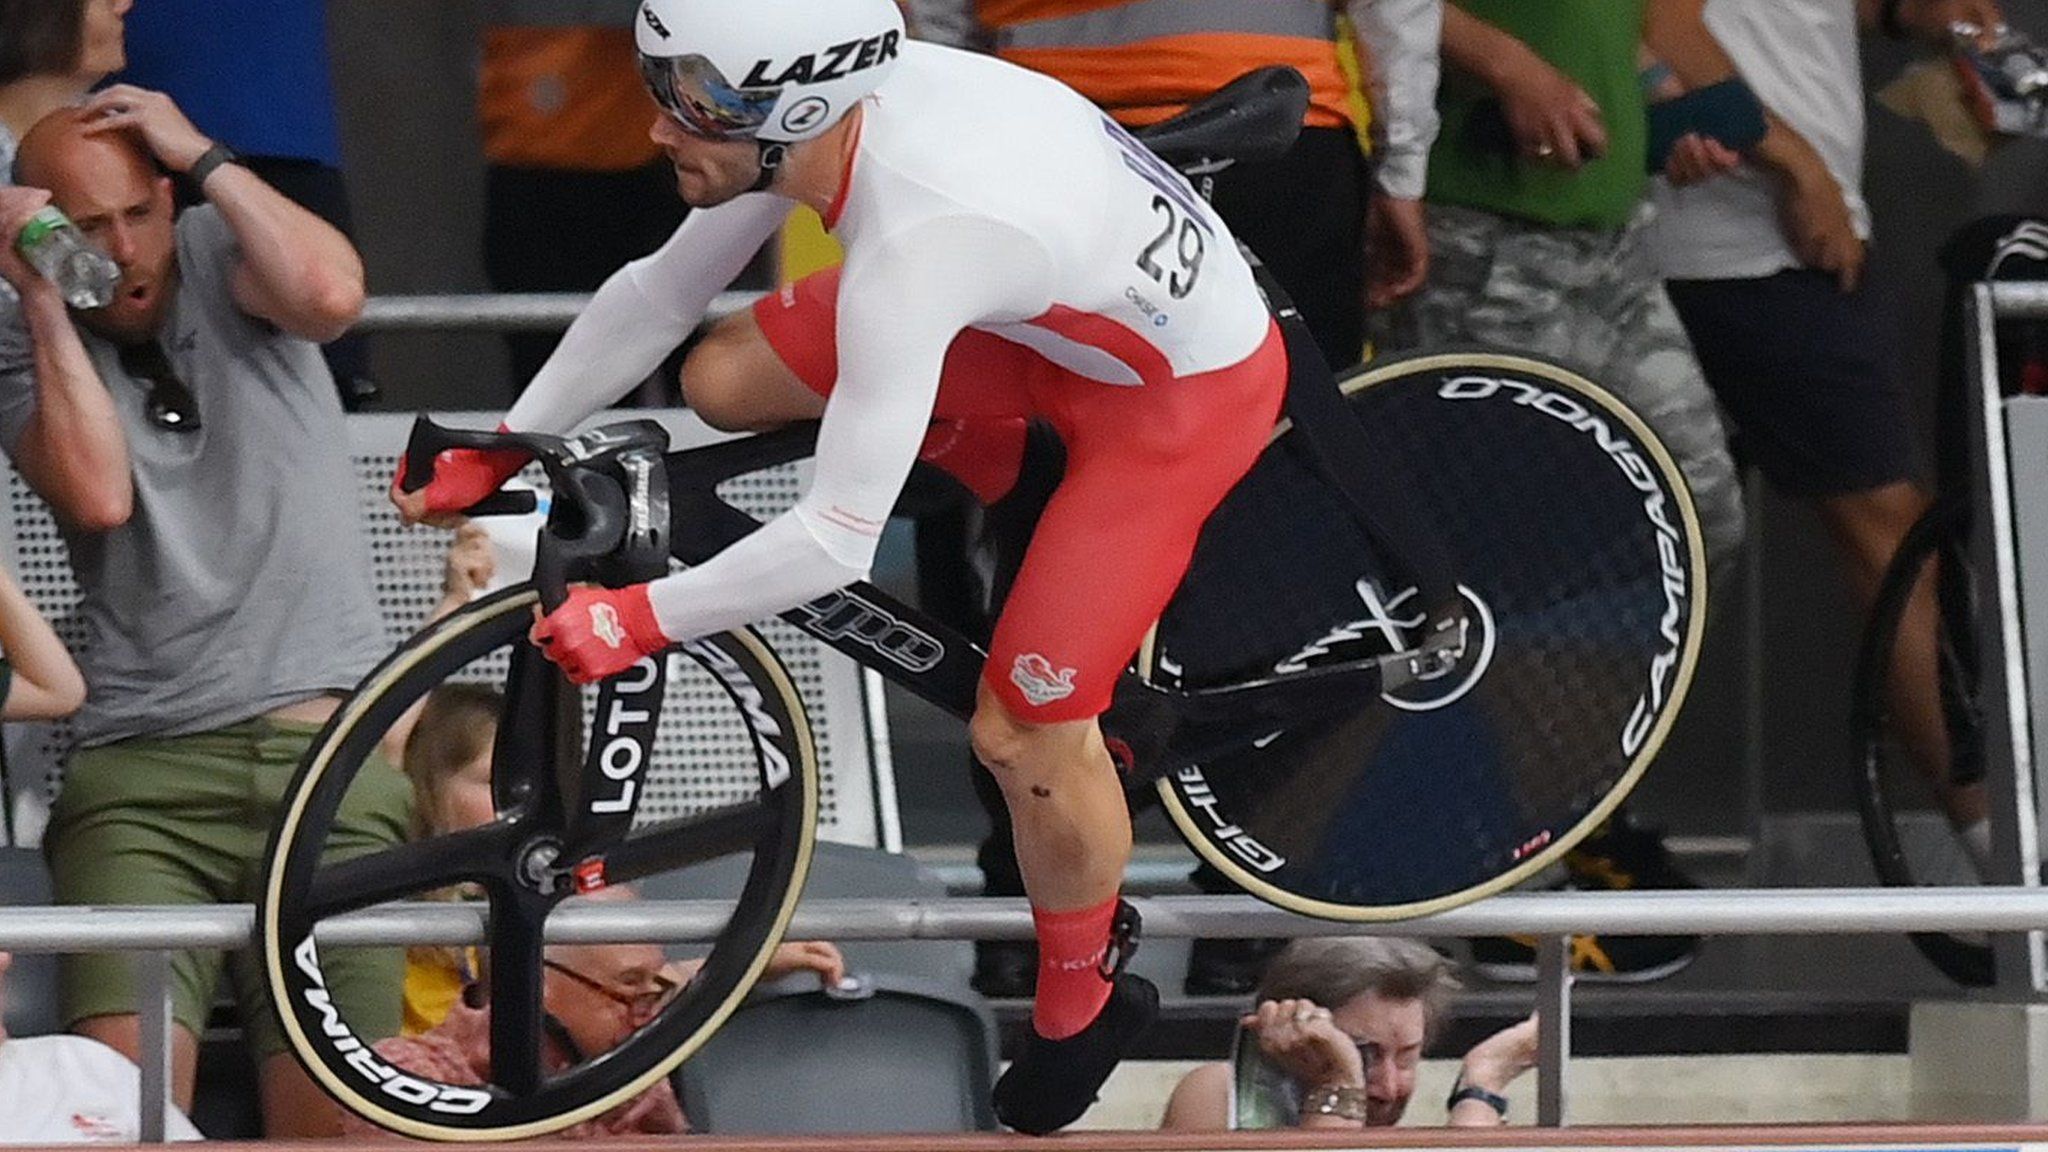 Team England cyclist Matt Walls crashes over the barriers and into the crowd at the velodrome during the Commonwealth Games